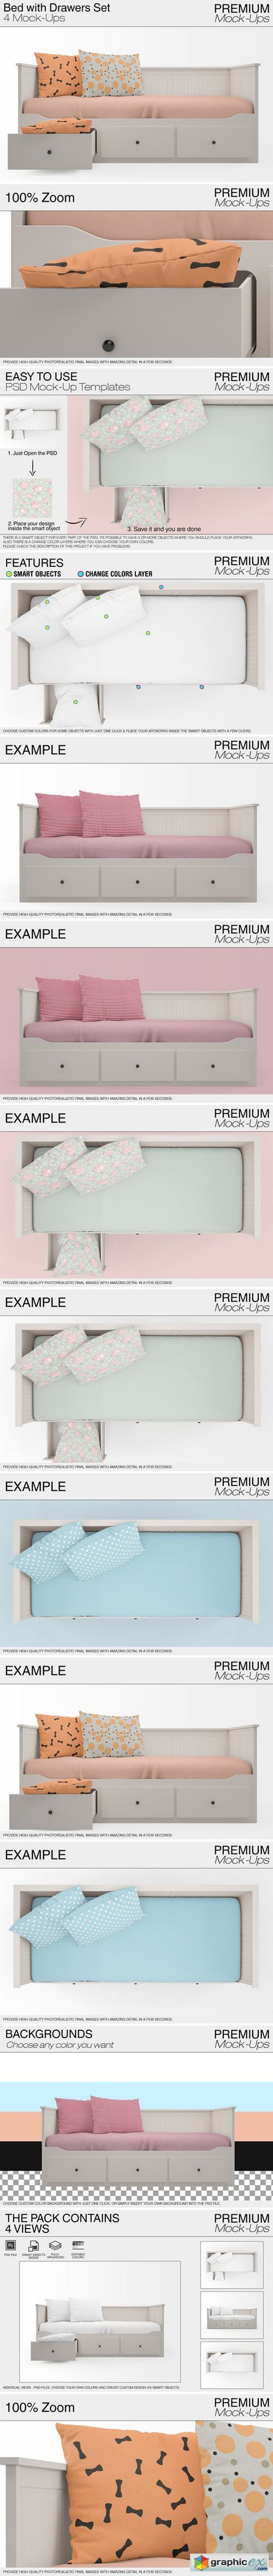 Bed with Drawers Mockup Pack